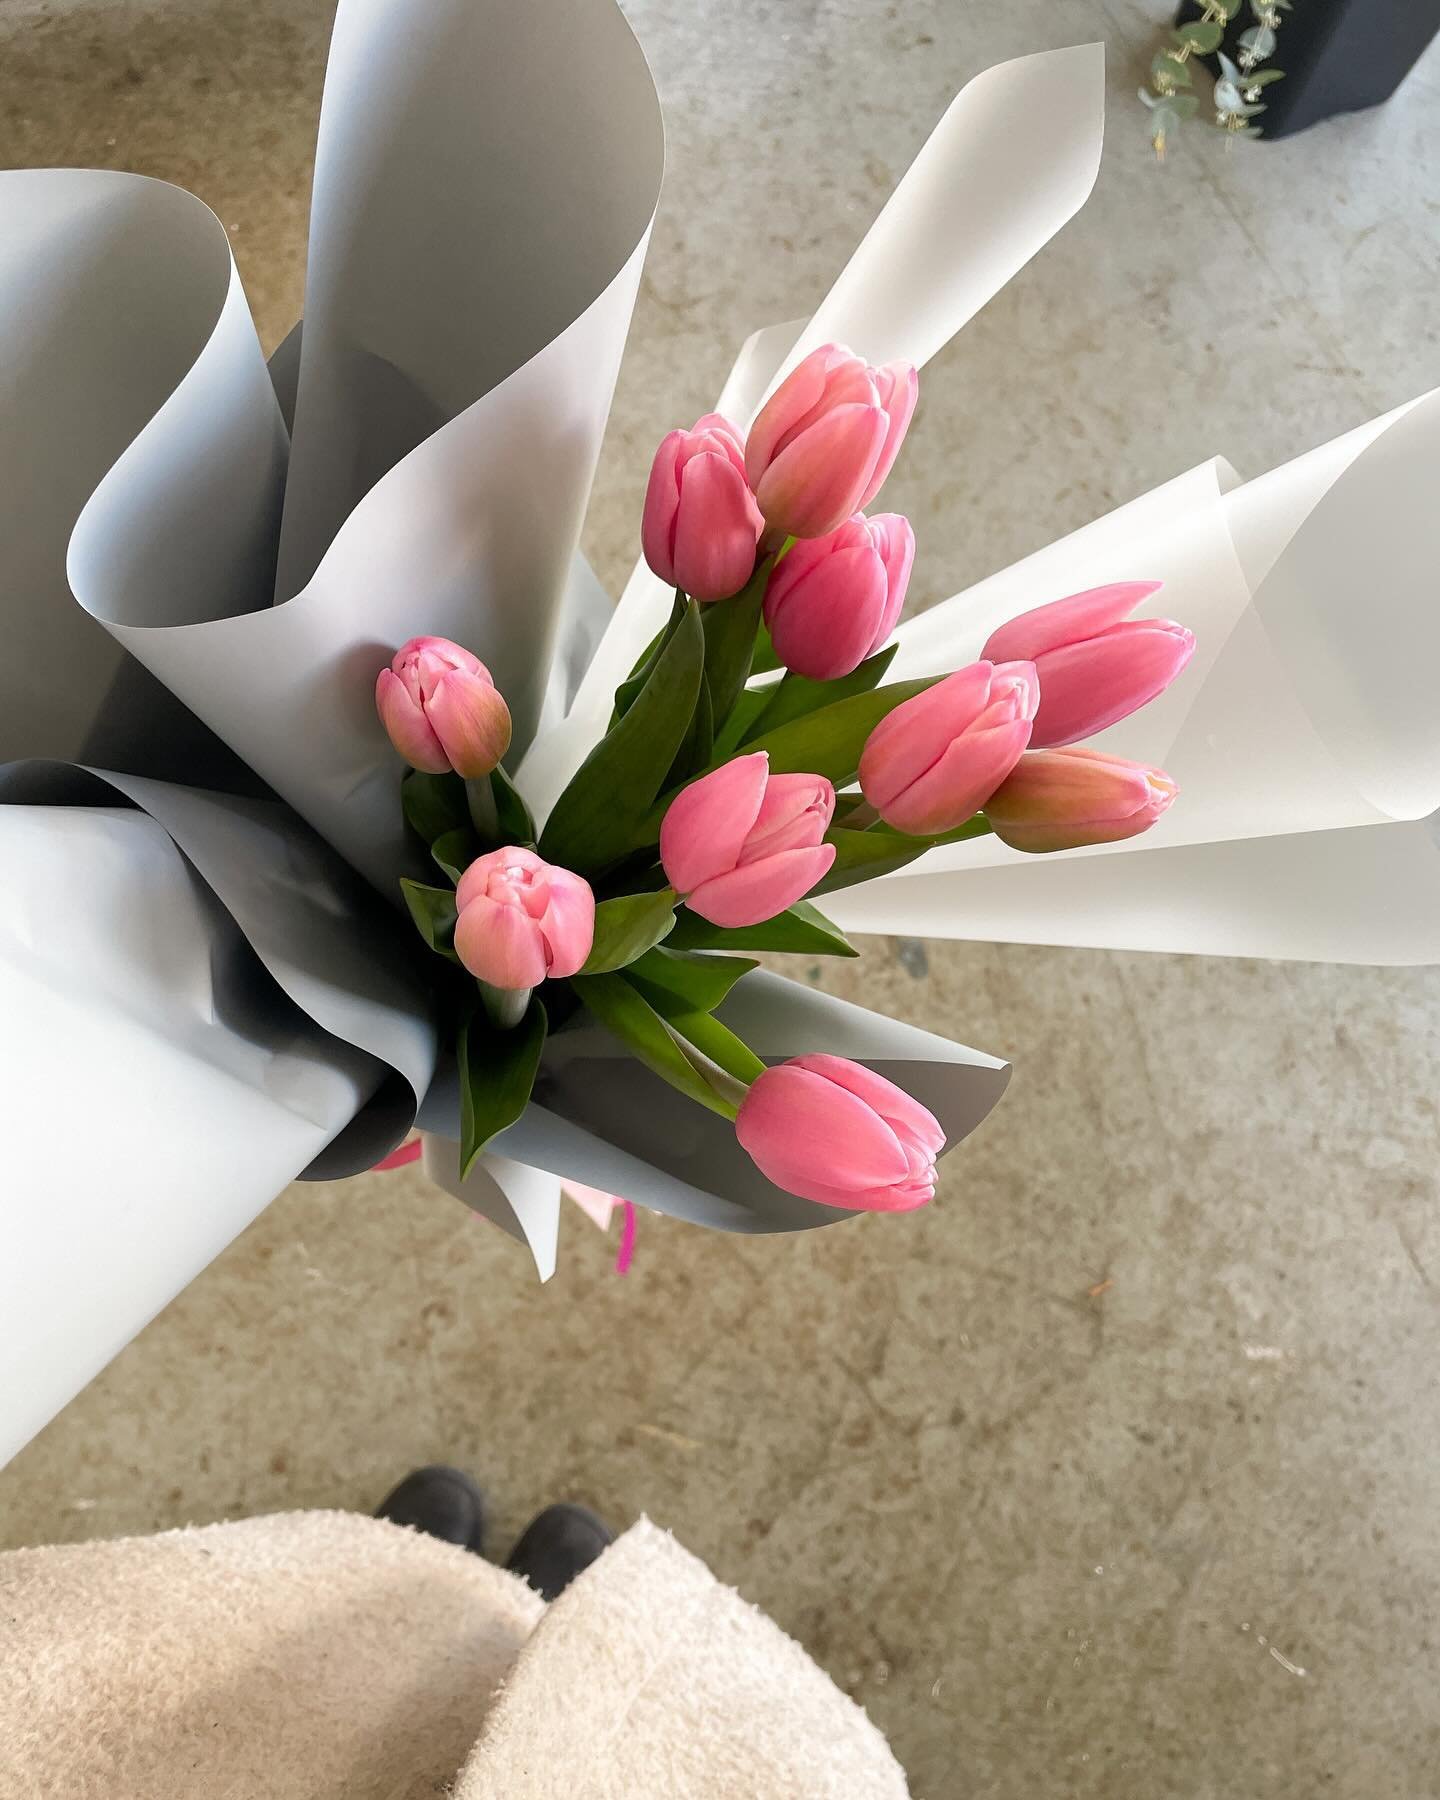 Only a handful of En Masse for Mum tulips left, they&rsquo;ve absolutely popped off!

L-R: En Masse for Mum Tulips, Signature Bouquet Mother&rsquo;s Day Edition Small, En Masse for Mum Chrysanthemums.

🫶🫶🫶